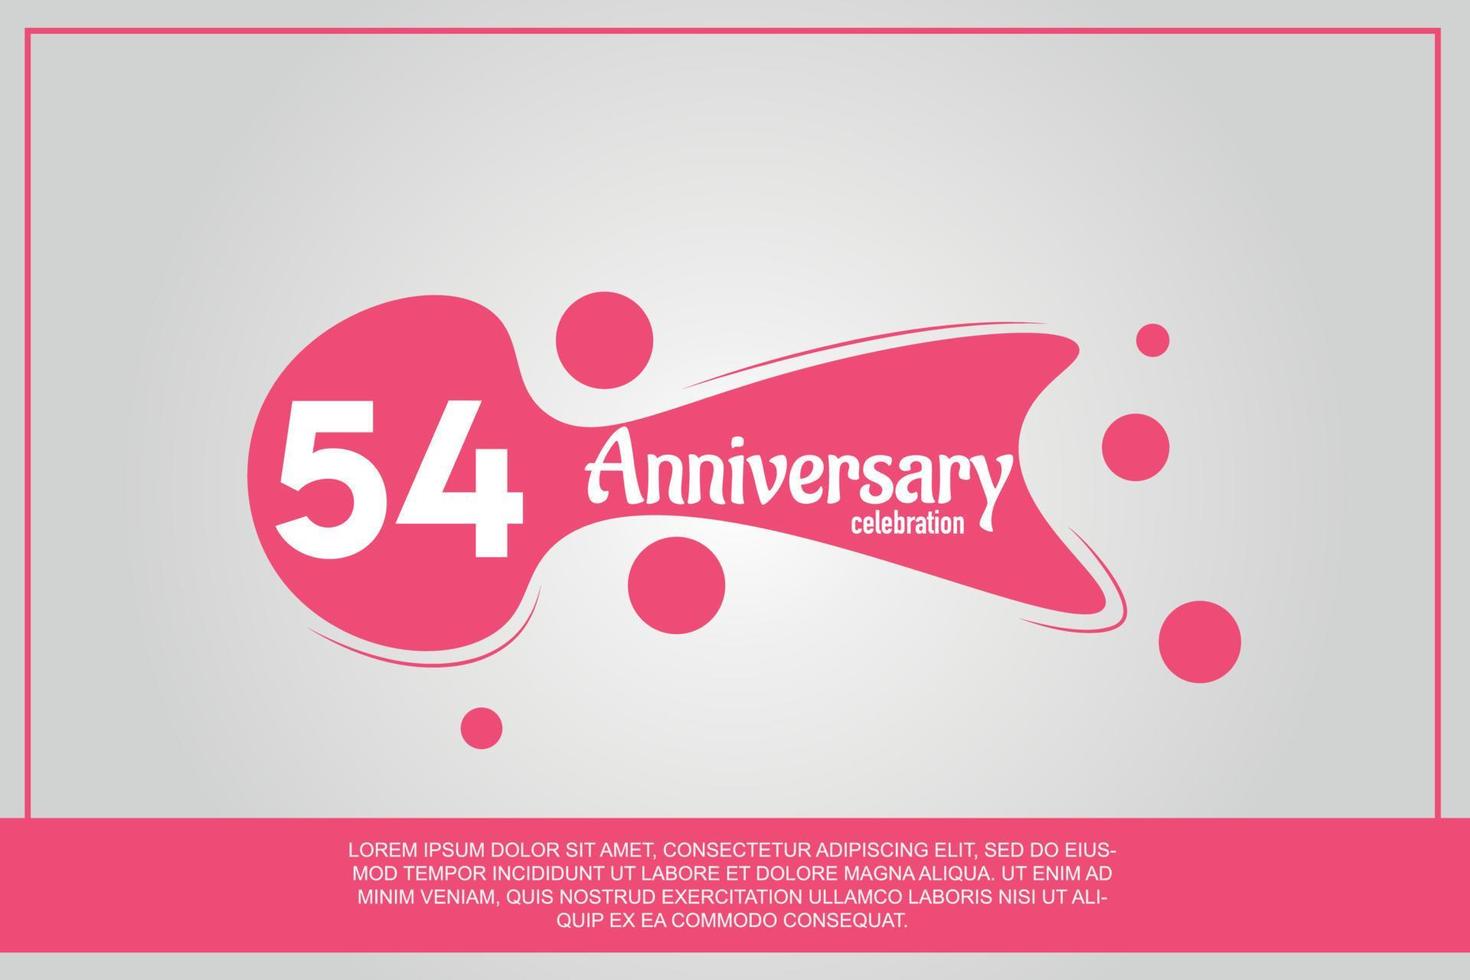 54 year anniversary celebration logo with pink color design with pink color bubbles on gray background vector abstract illustration